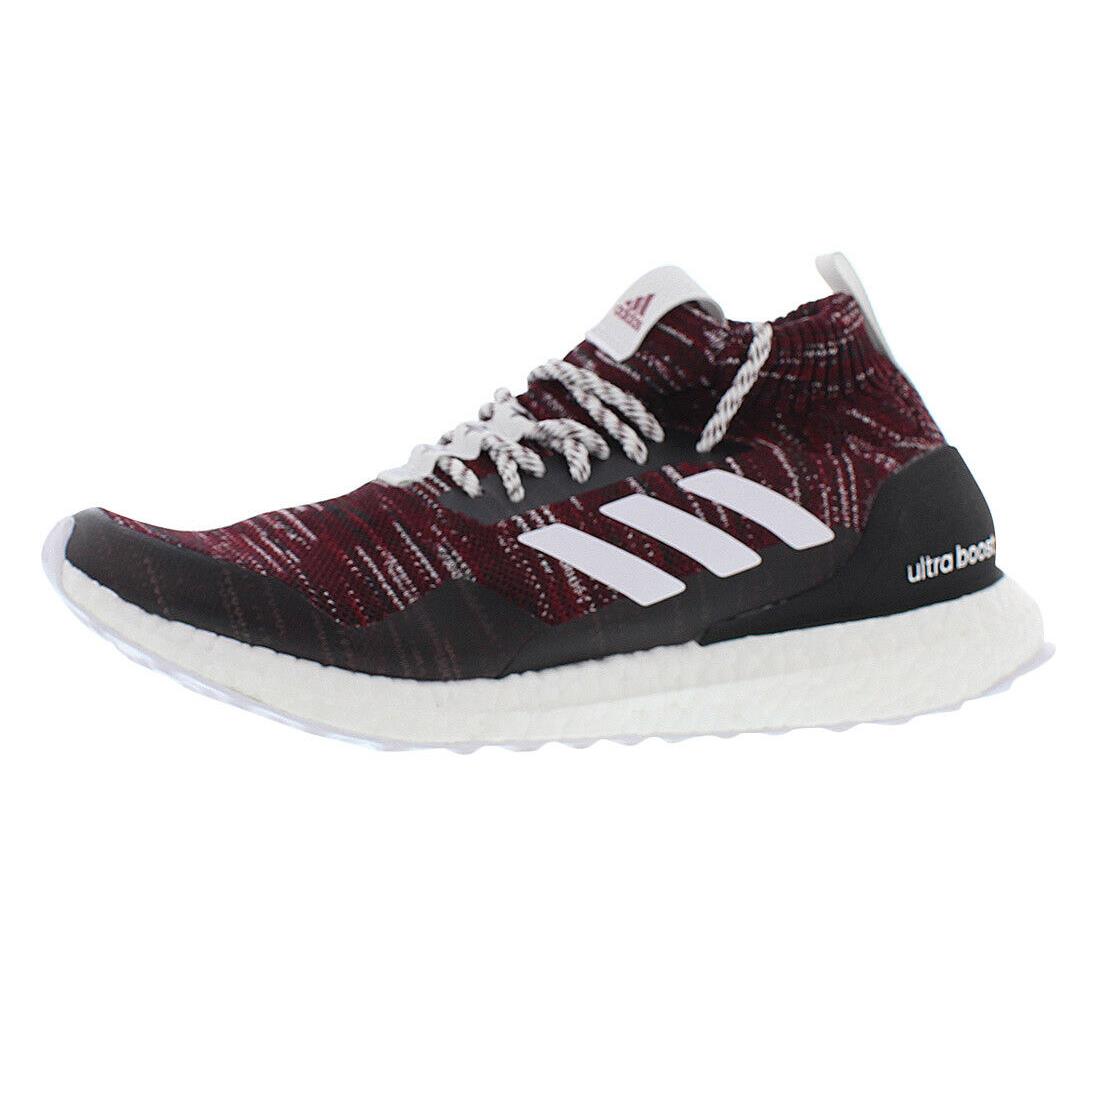 Adidas Ultraboost Dna Mid Mens Shoes - Maroon/White/Black, Main: Red